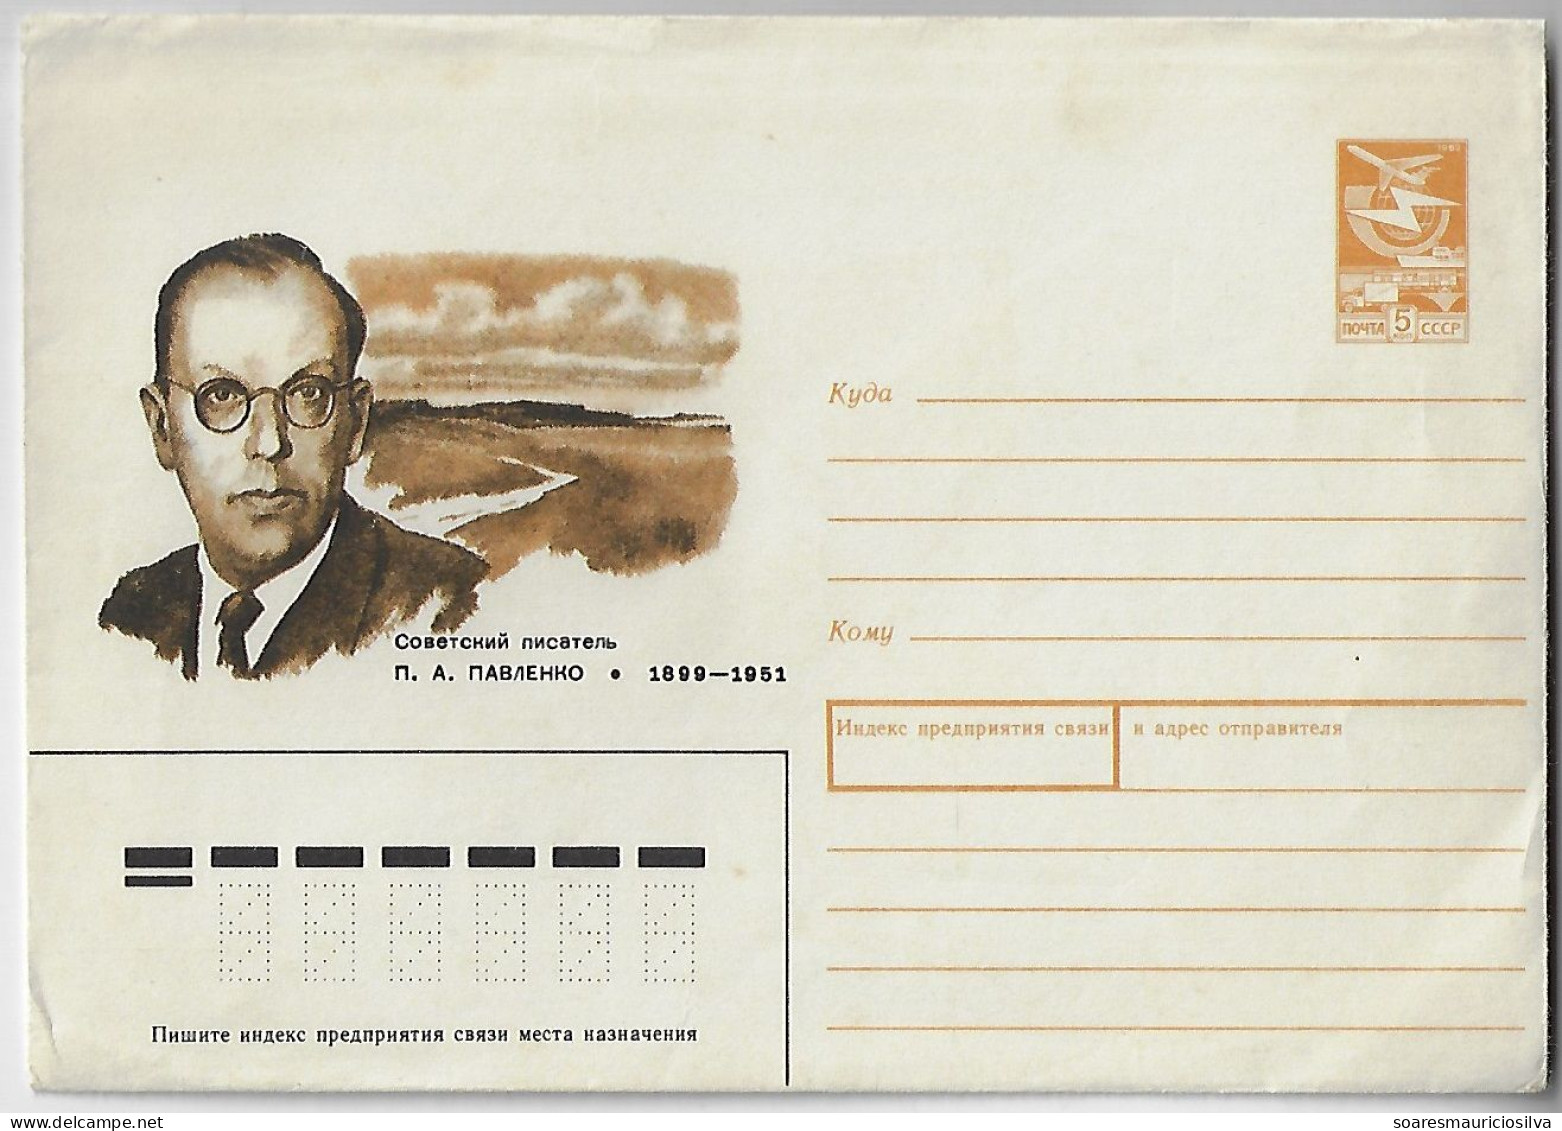 USSR Russia 1989 Postal Stationery Cover Writer Screenwriter And War Correspondent Petr Andreevich Pavlenko Unused - 1980-91